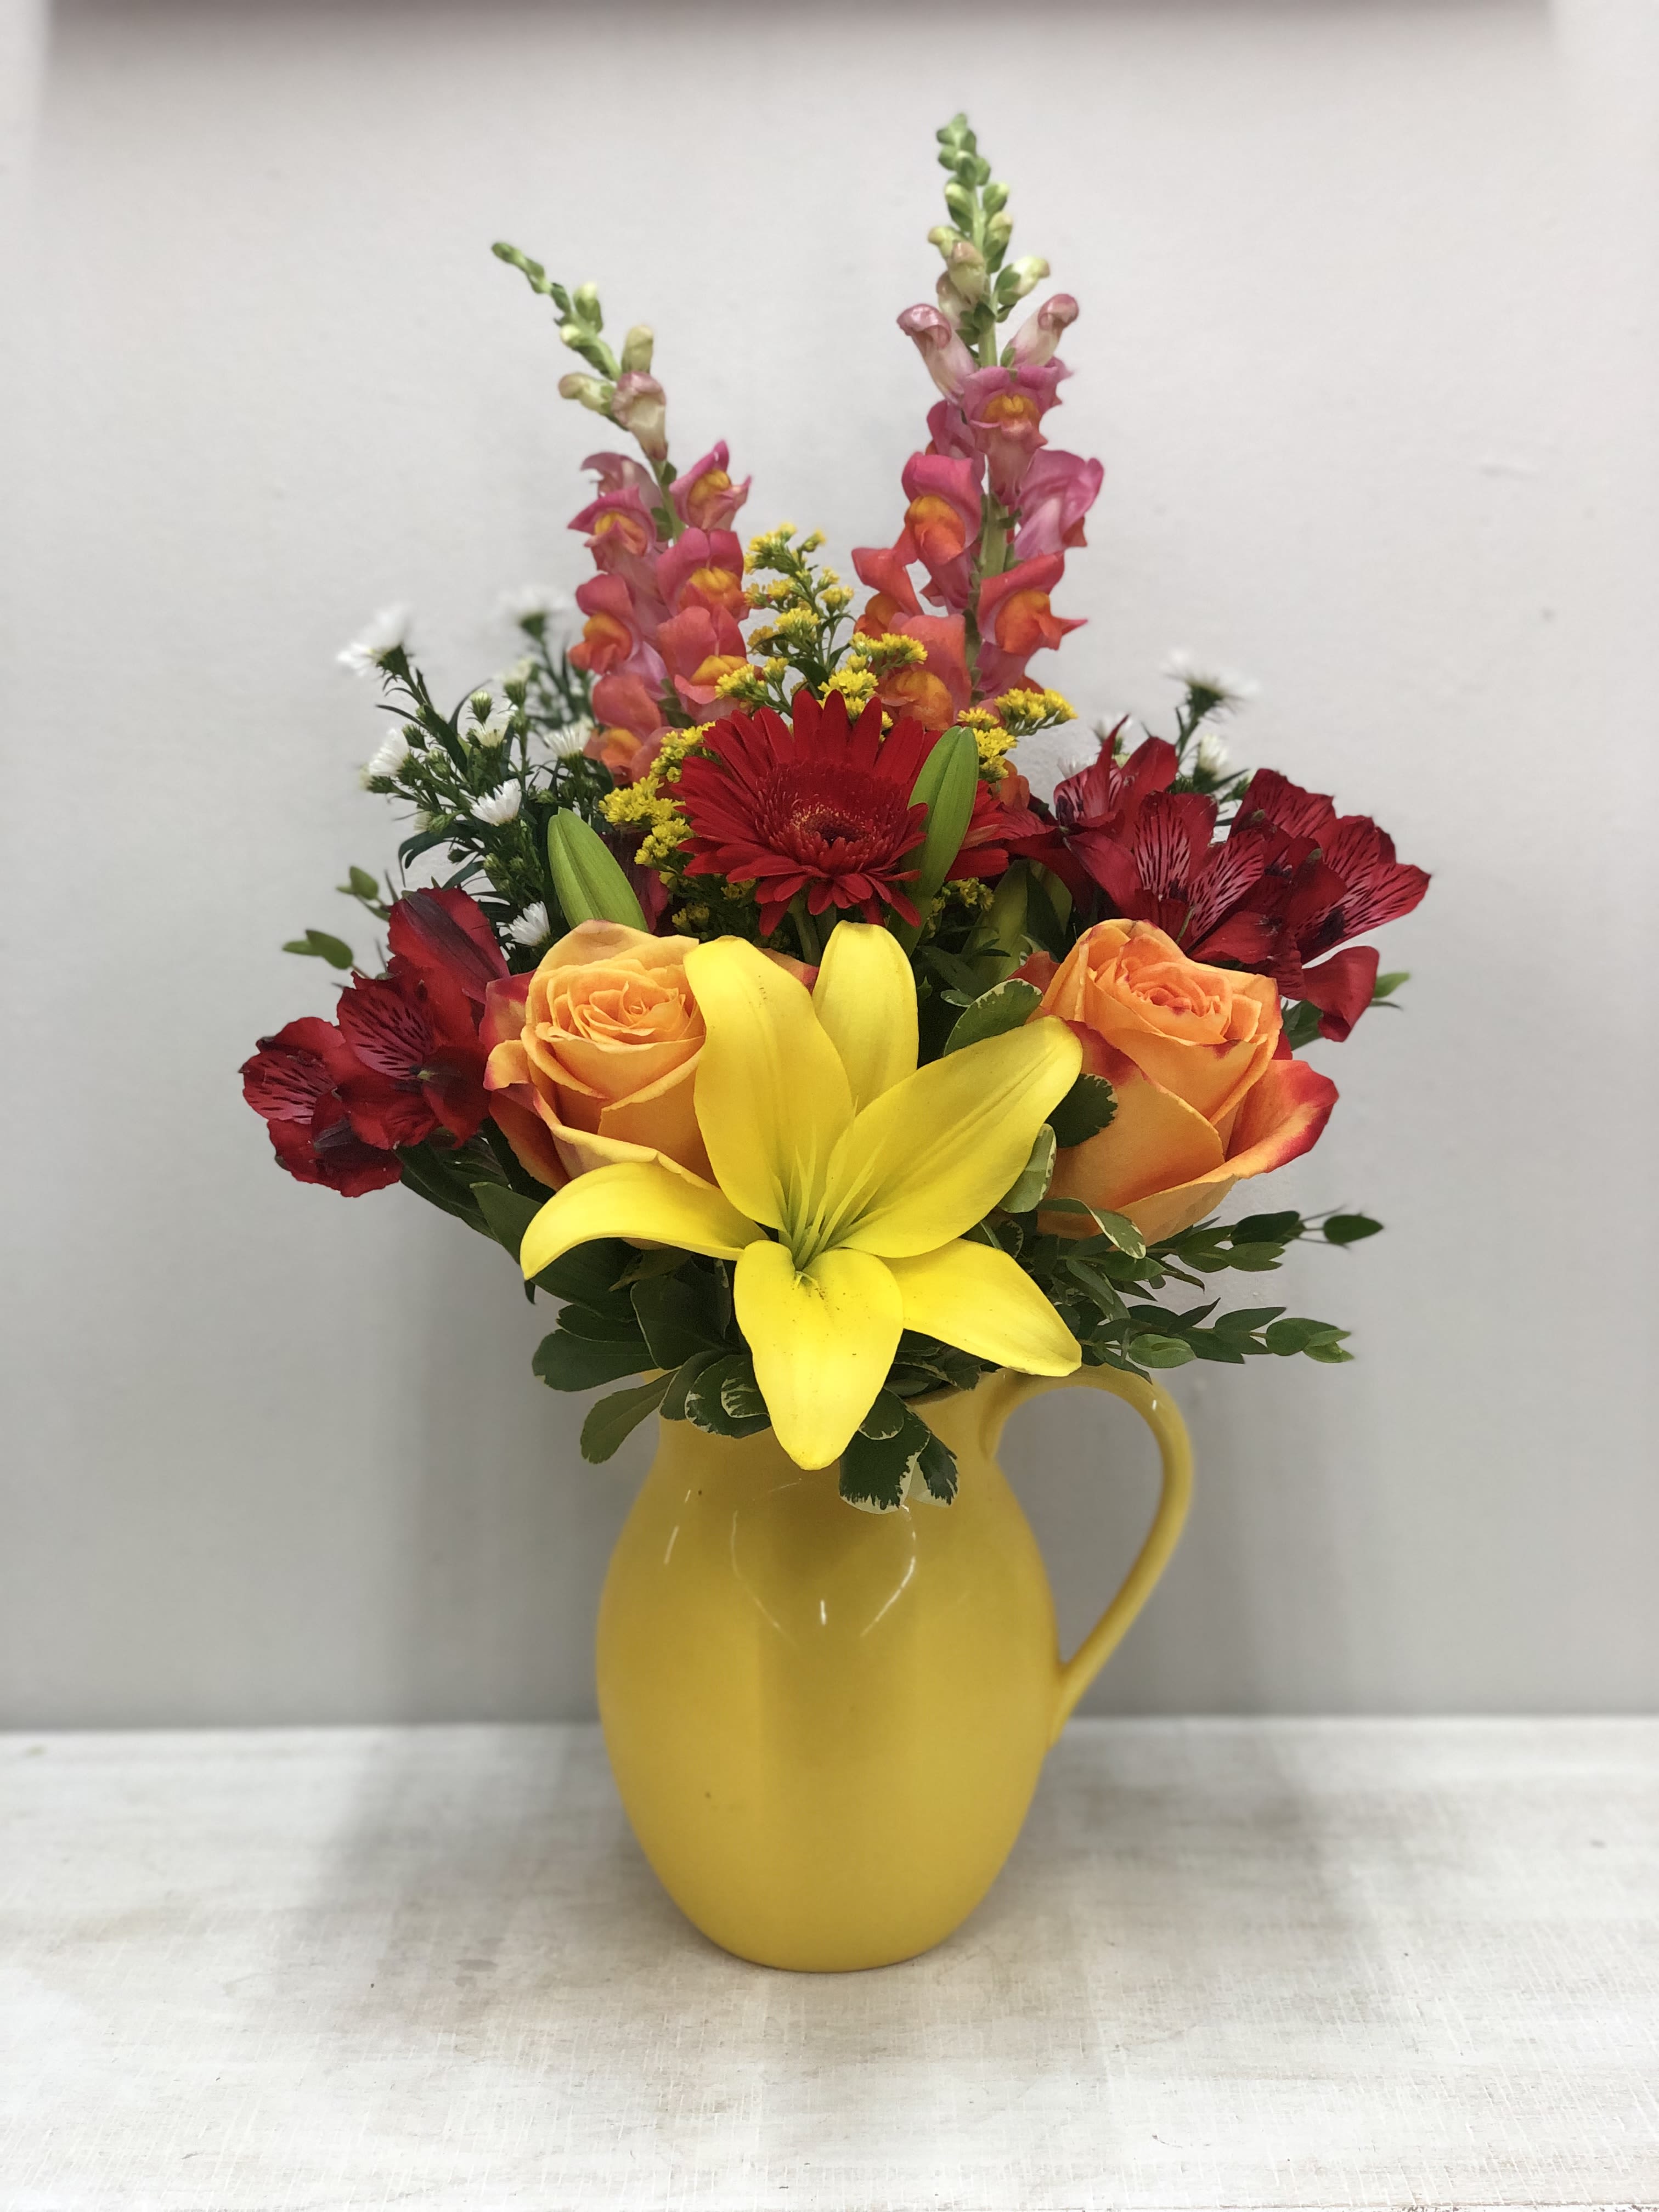 Summertime Bouquet  -  A yellow ceramic pitcher comes filled with bright colorful blooms to include a mix of snap dragons, gerbera daisies, roses, lily, alstroemerias and more! The perfect pour of sunshine. 